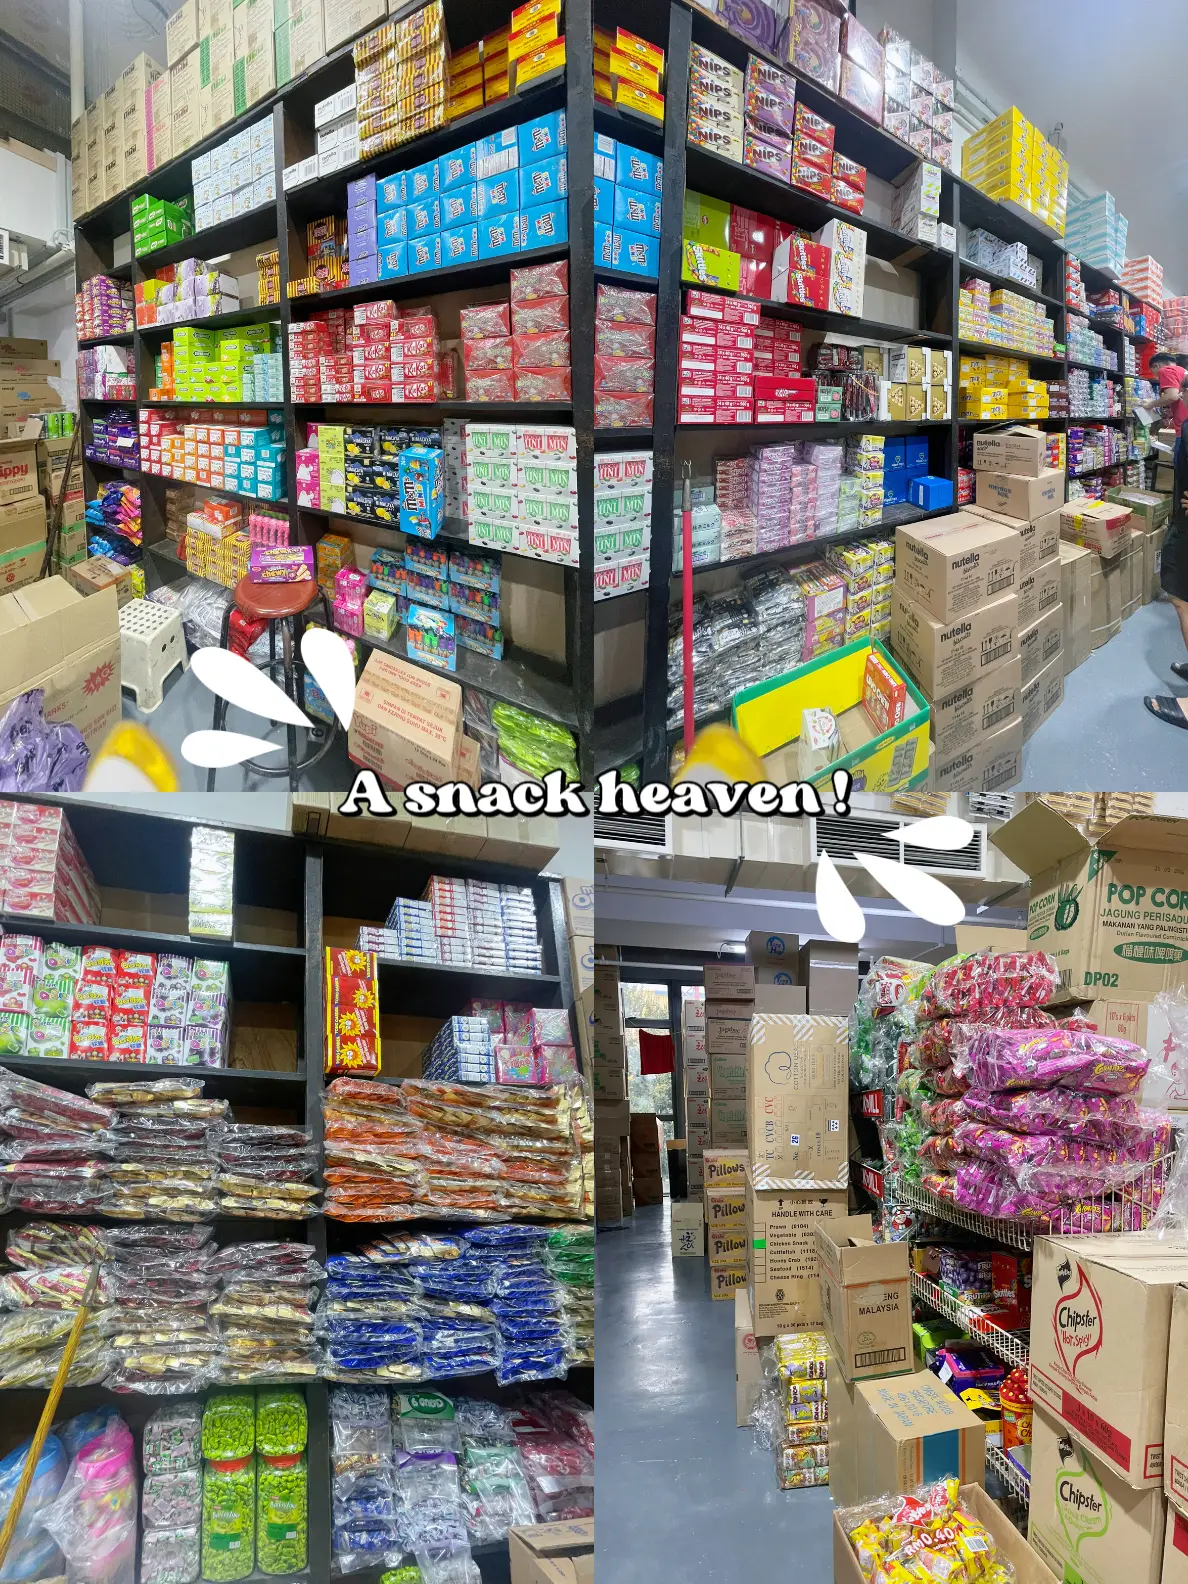 SNACK HEAVEN at a wholesale price 🤩's images(2)